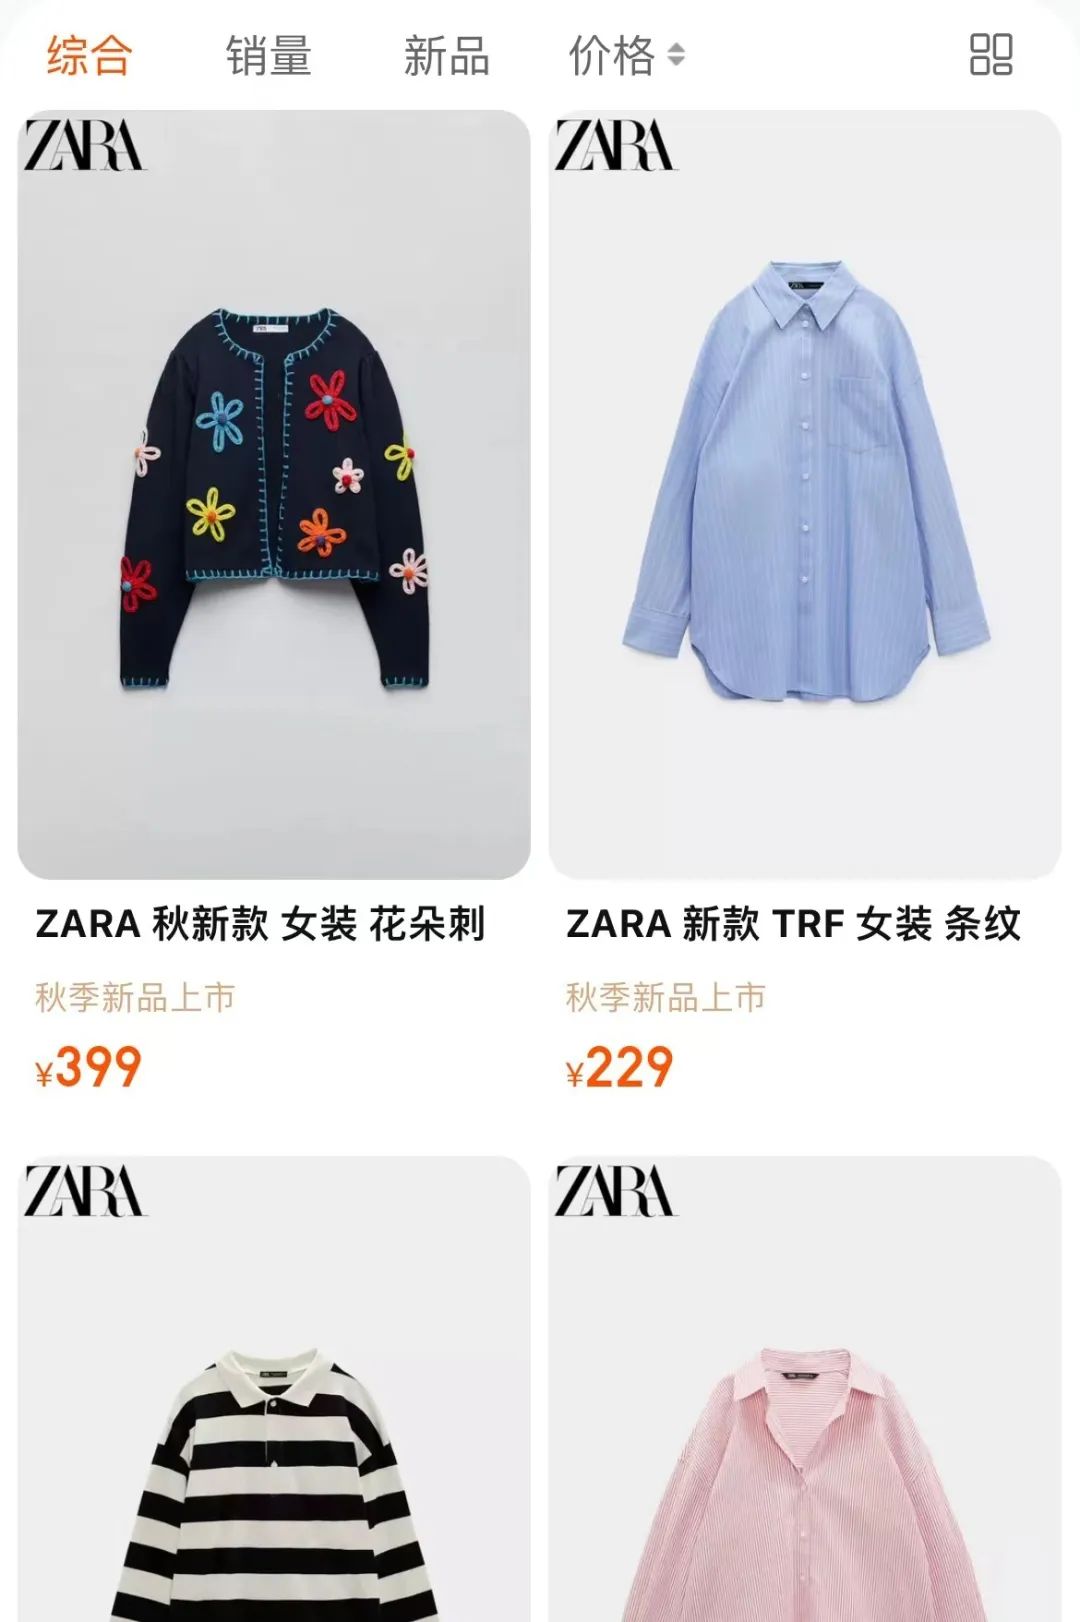 The Rise of Zara, Upscale Clothing Brand - Industry News Corp